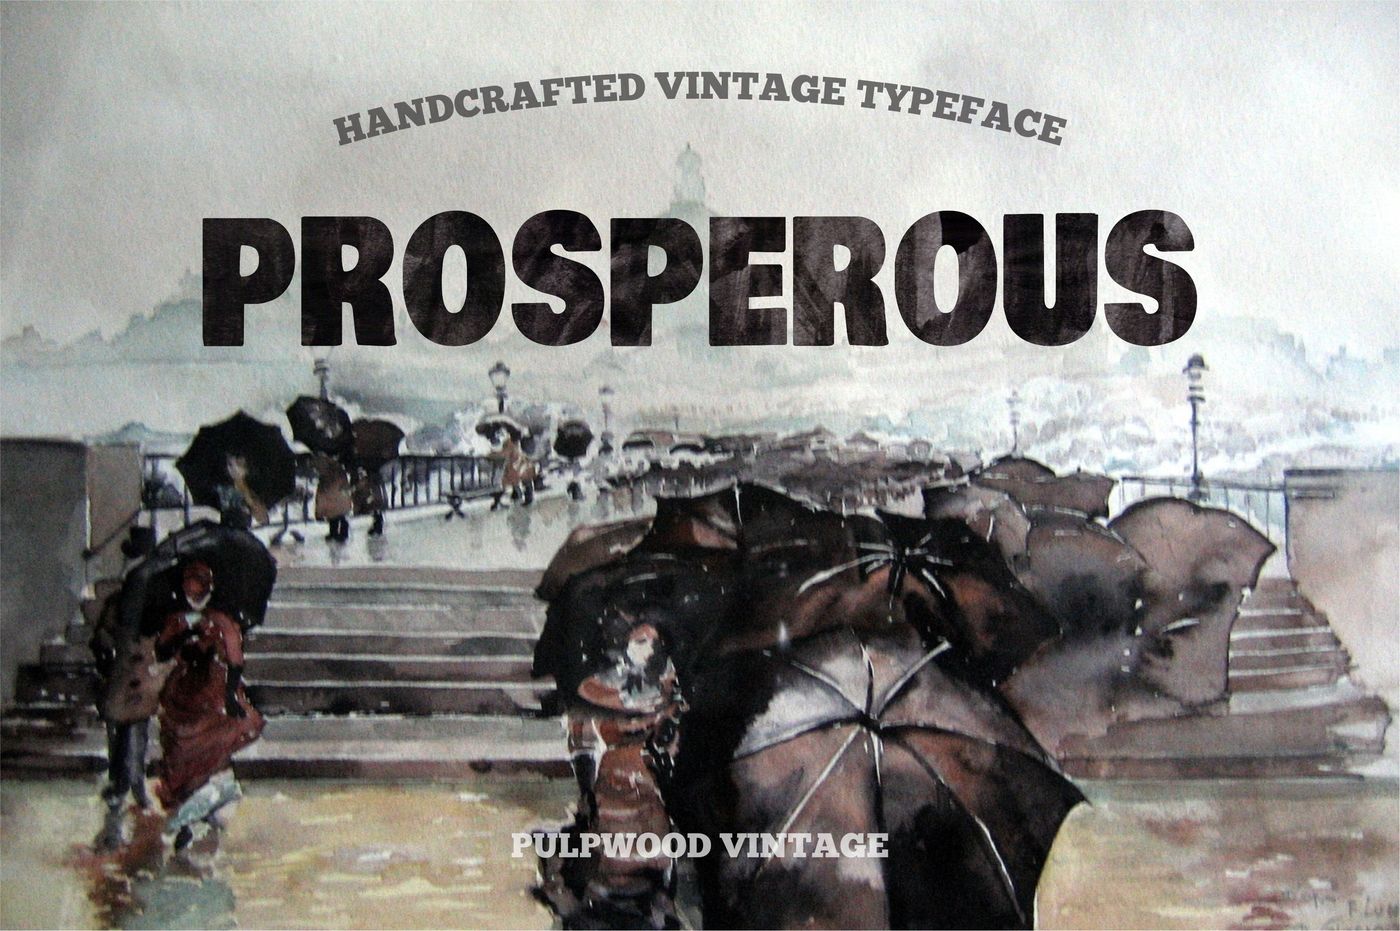 Pulpwood Font Vintage Typeface With Prosperous Cover By Vintage Font Lab Thehungryjpeg Com